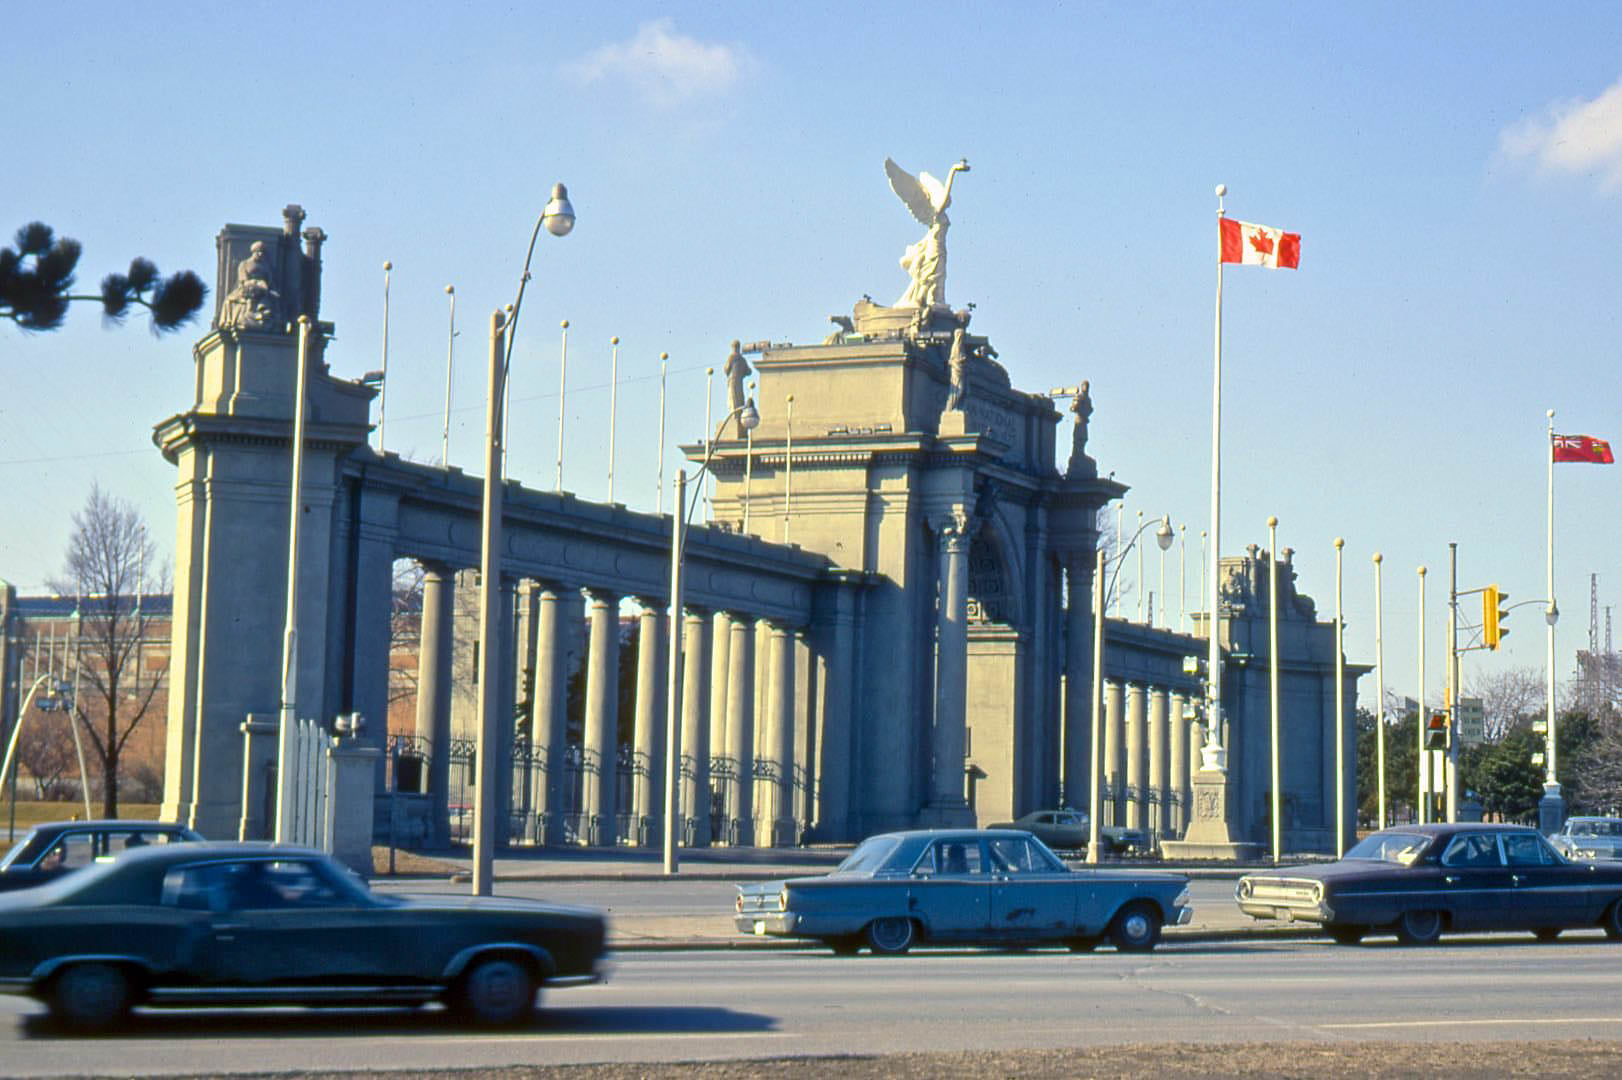 The Princes' Gates, CNE. Captured by my father in March 1970.